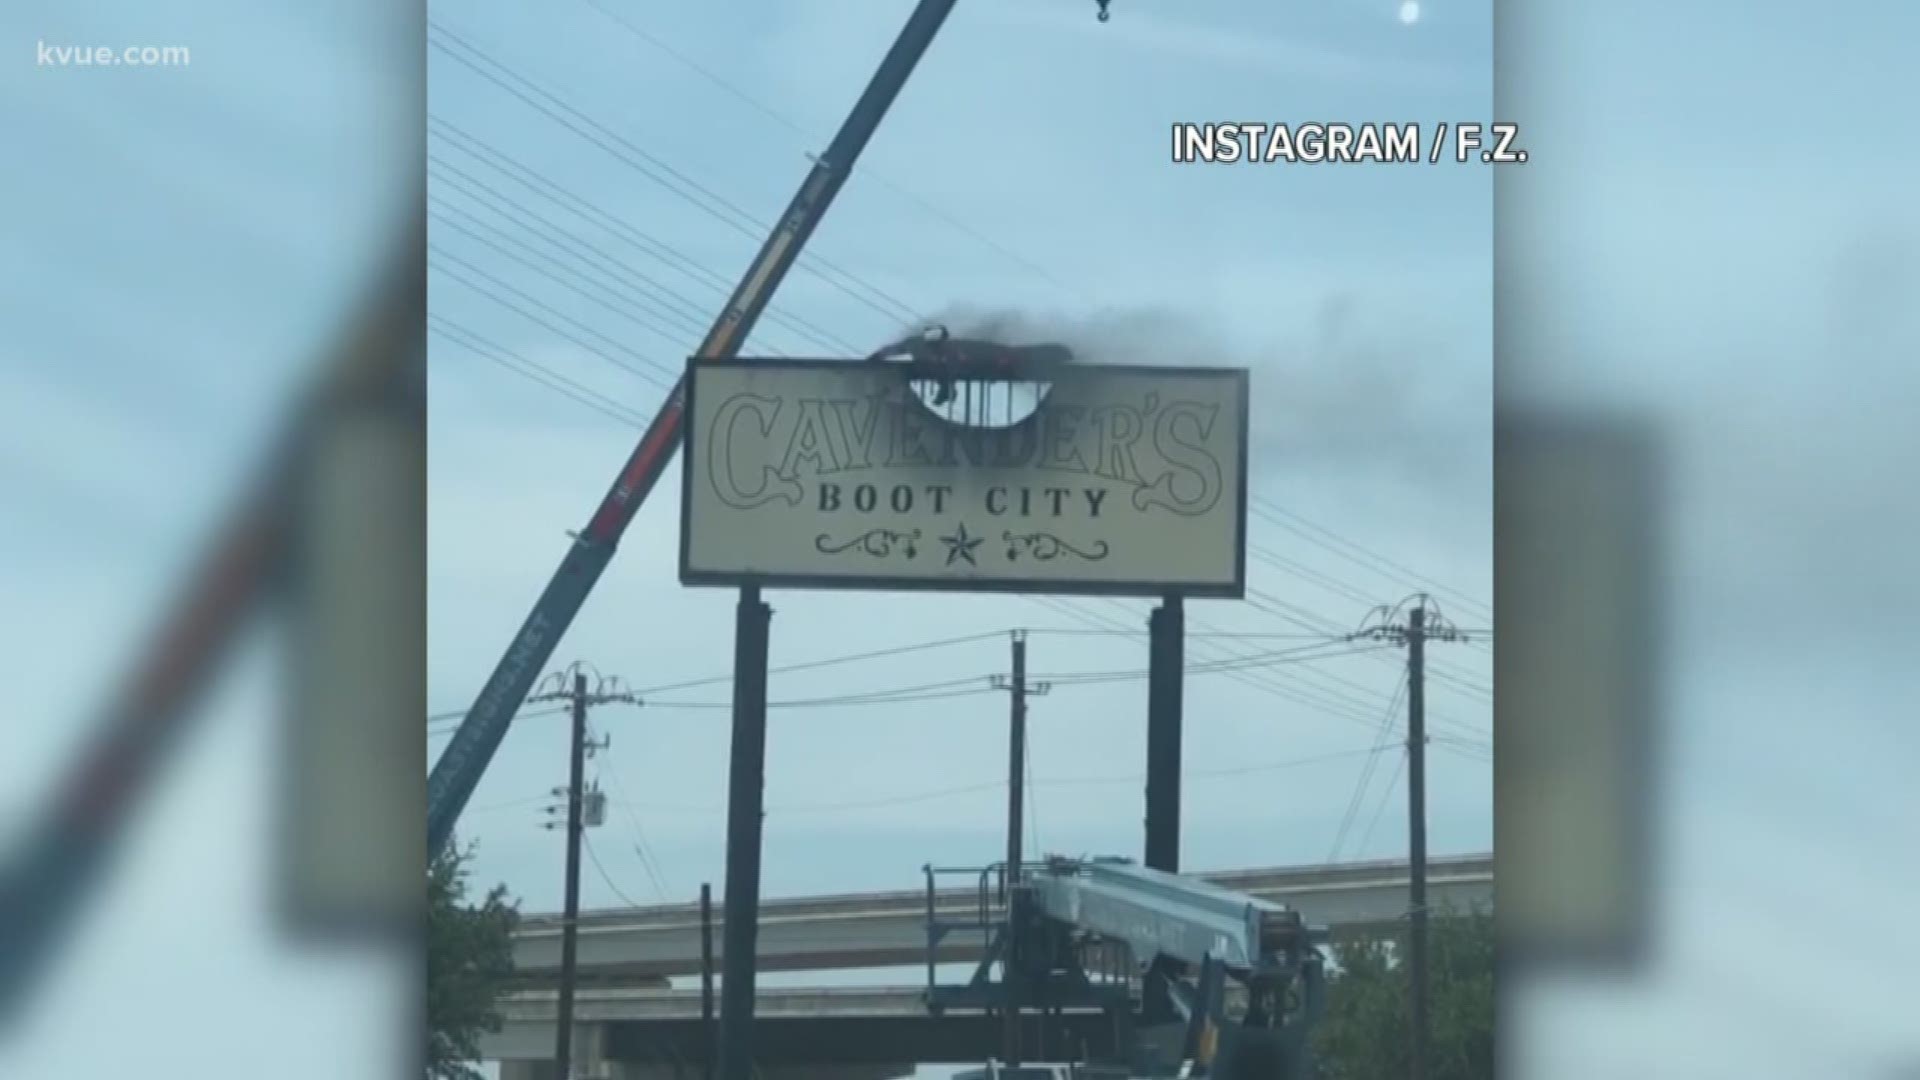 Cavender's said they purposely used a blow torch to melt the sign to replace it with a new one.